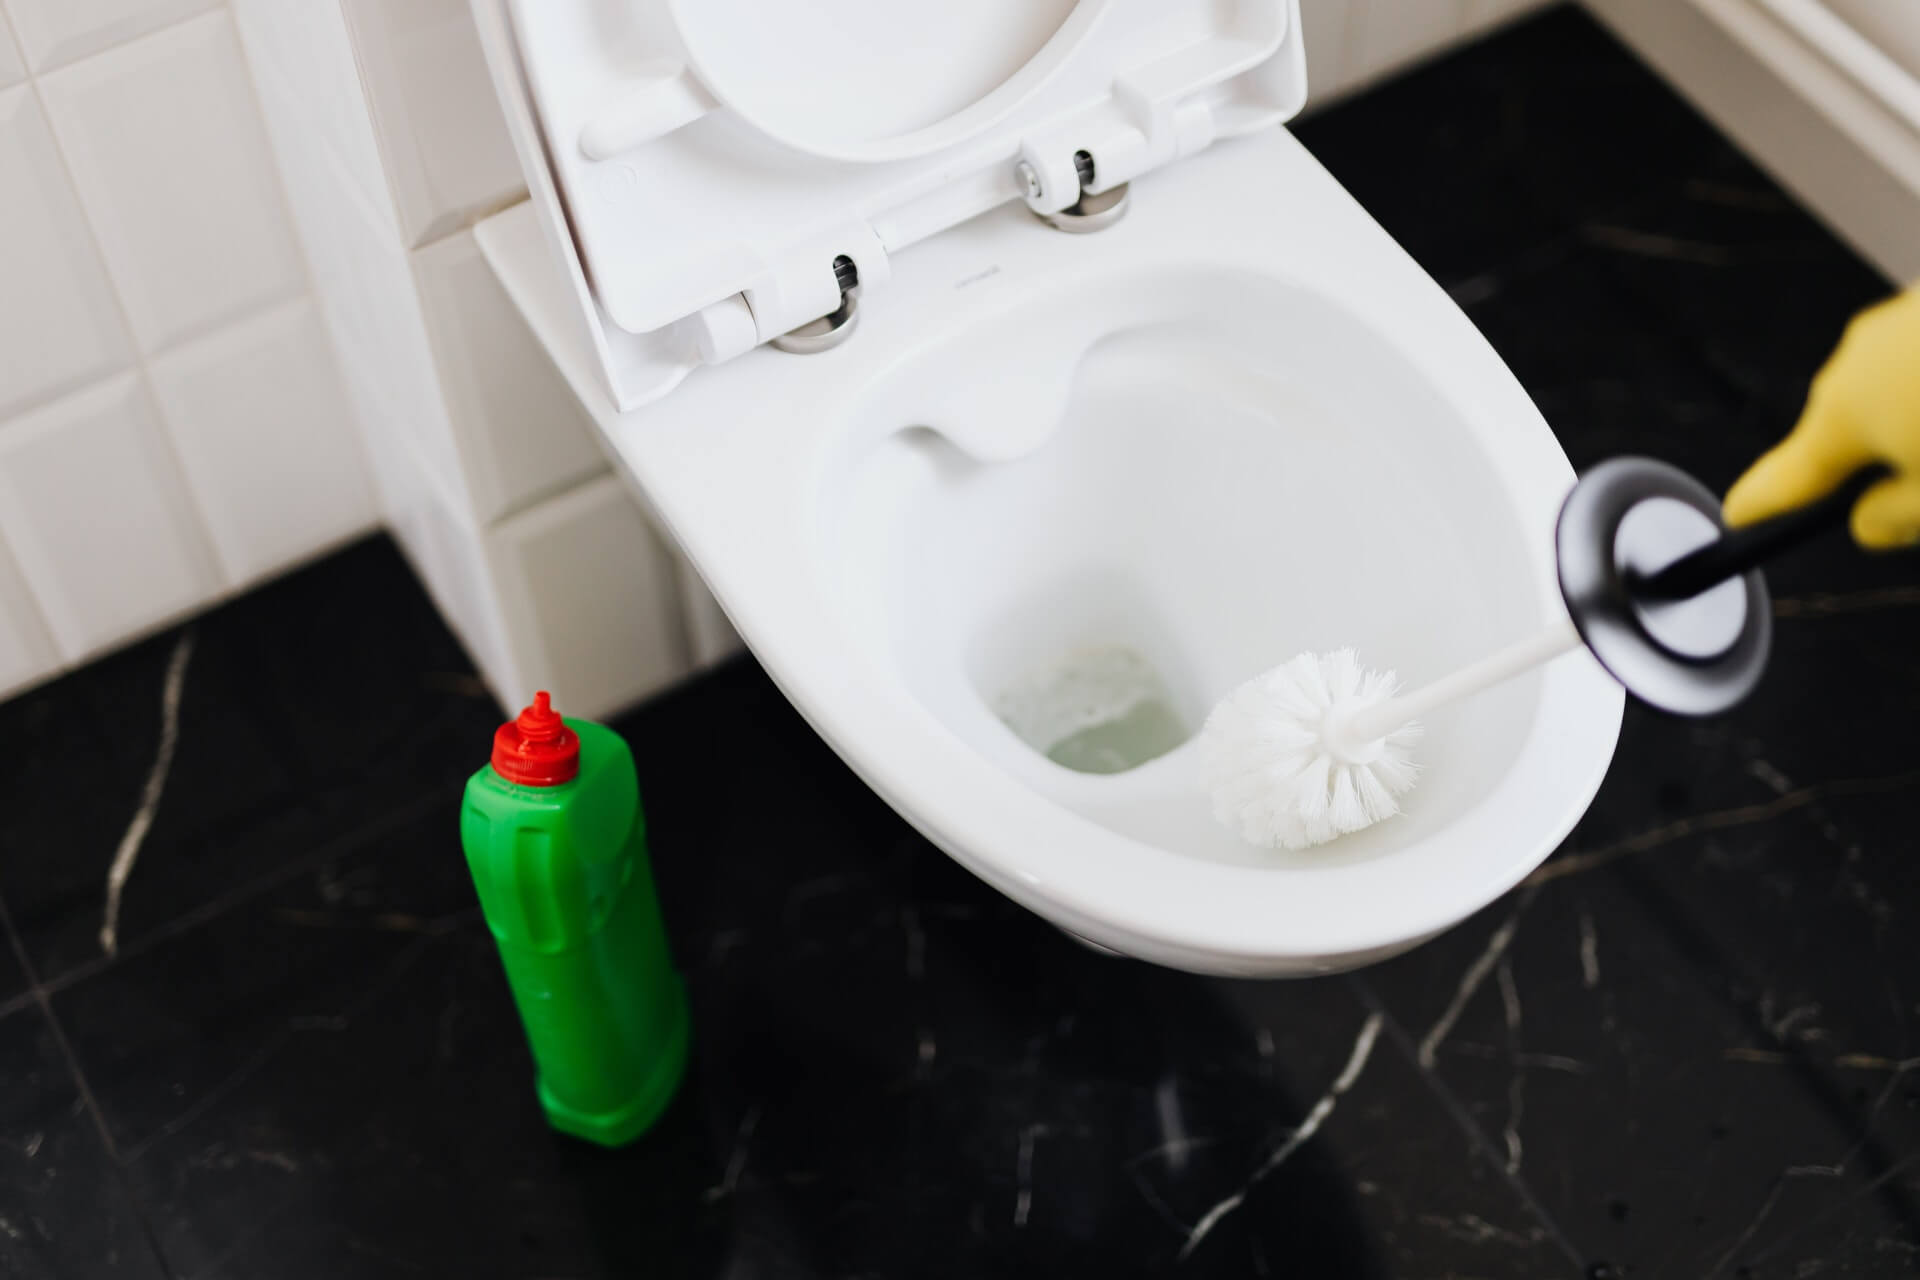 How To Remove A Poop Stain From A Toilet Seat